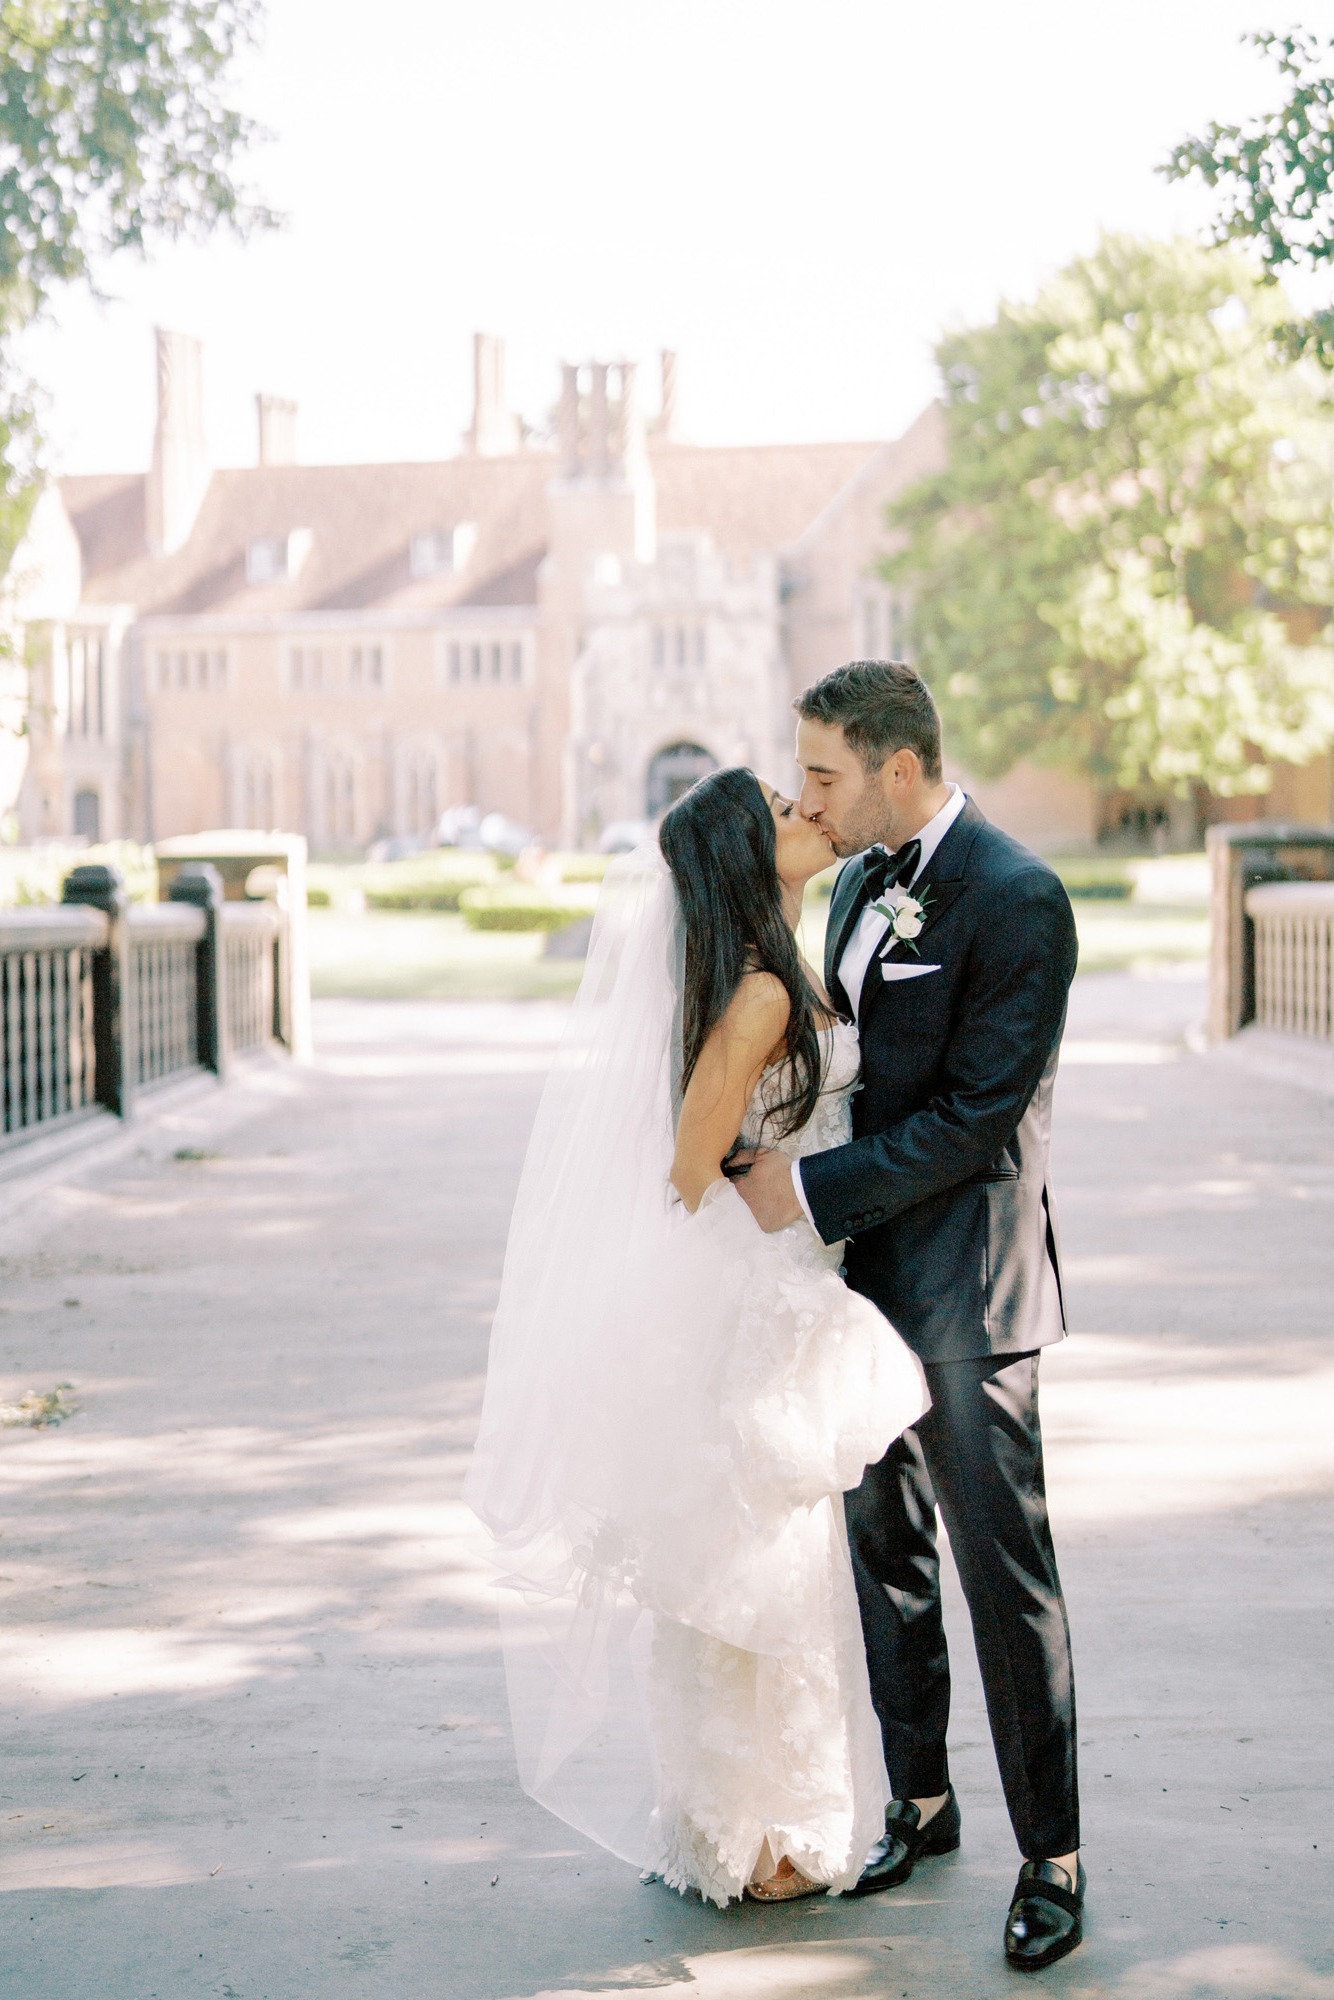 Tips for Pairing a Veil with Your Wedding Dress